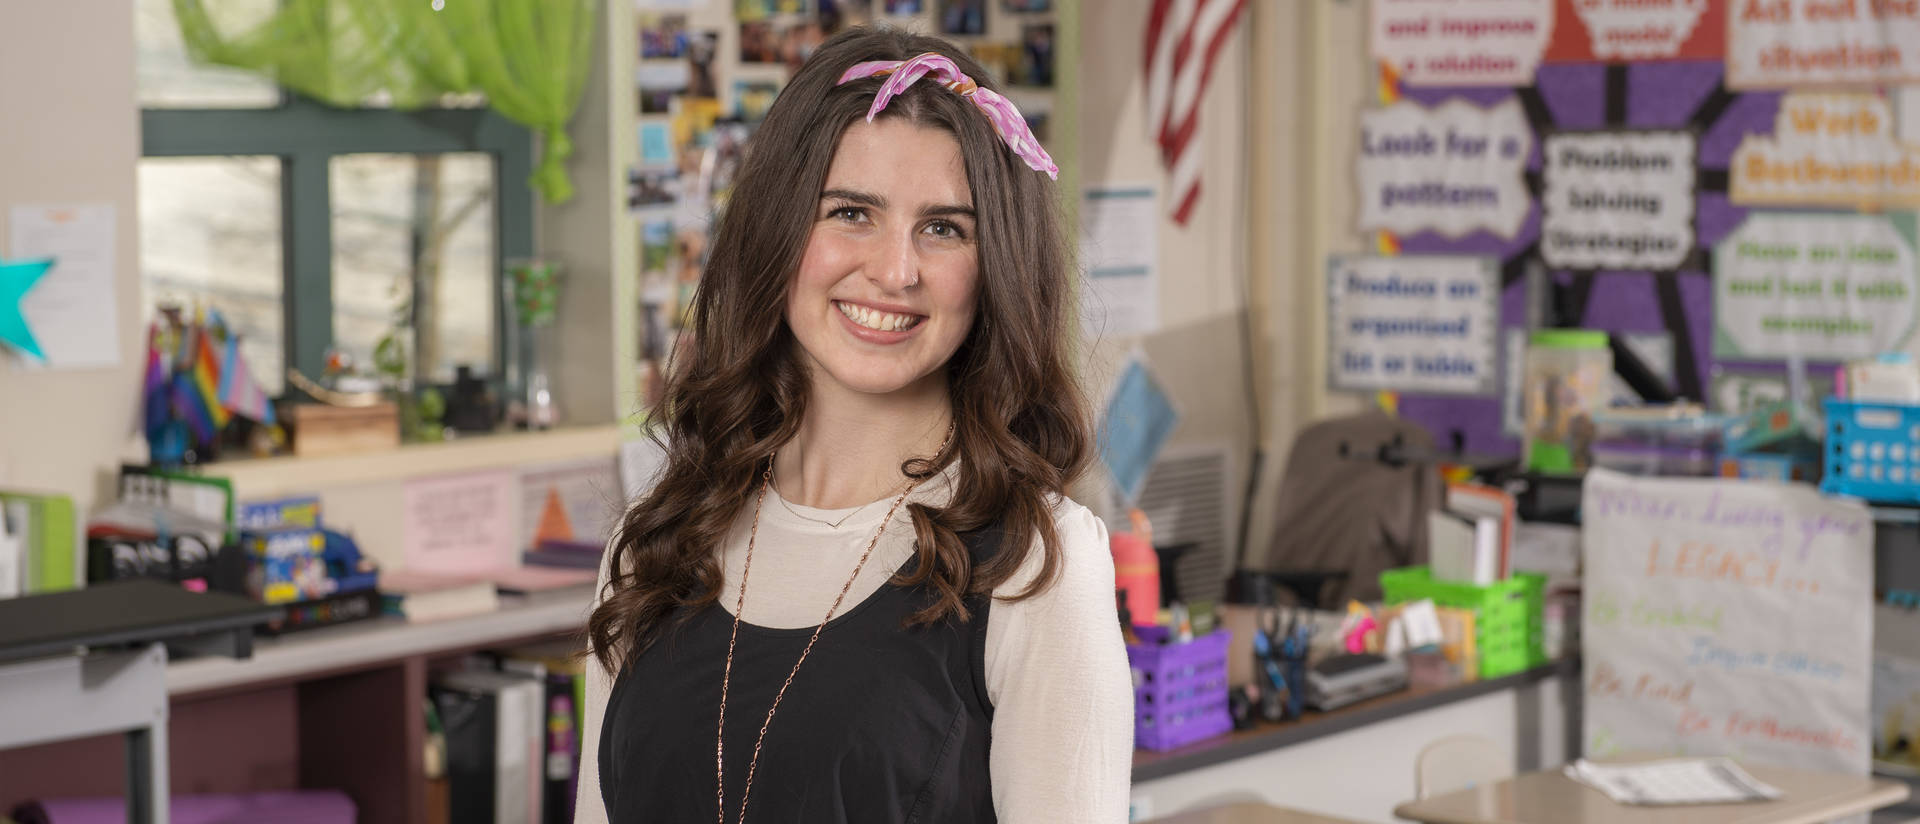 Abbi Holzmann has known since she was a young girl that she wanted to be a teacher. The ongoing pandemic has made her more determined than ever to make a difference in the lives of students.  (Photo by Shane Opatz)